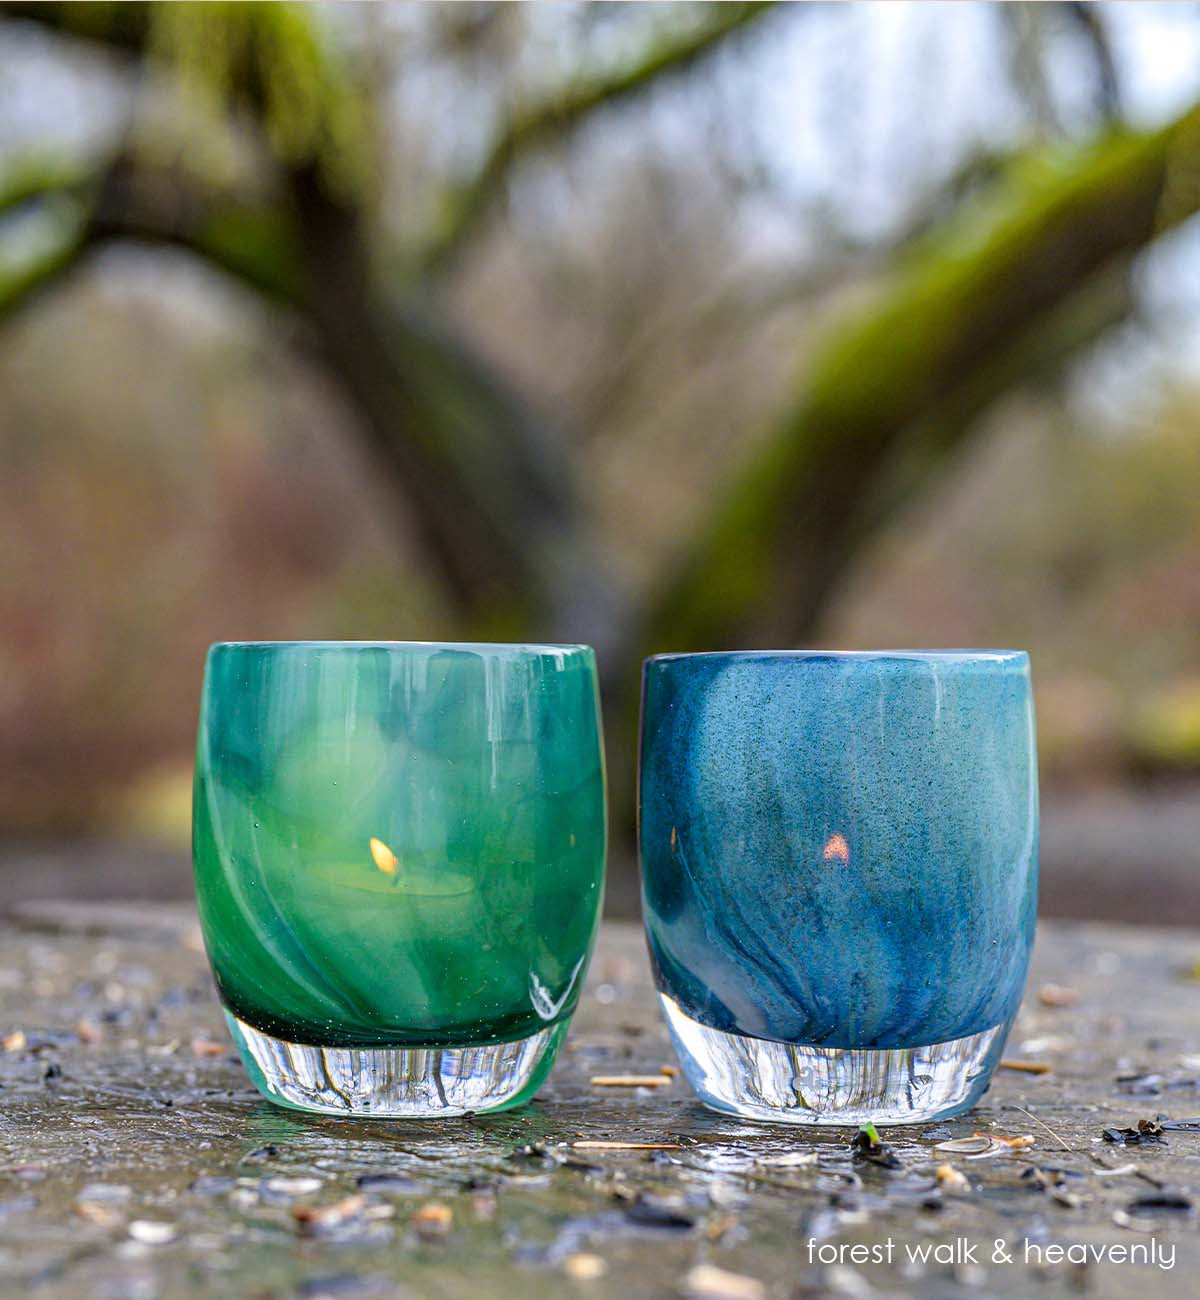 forest walk, translucent green swirl hand-blown glass votive candle holder. Paired with heavenly.